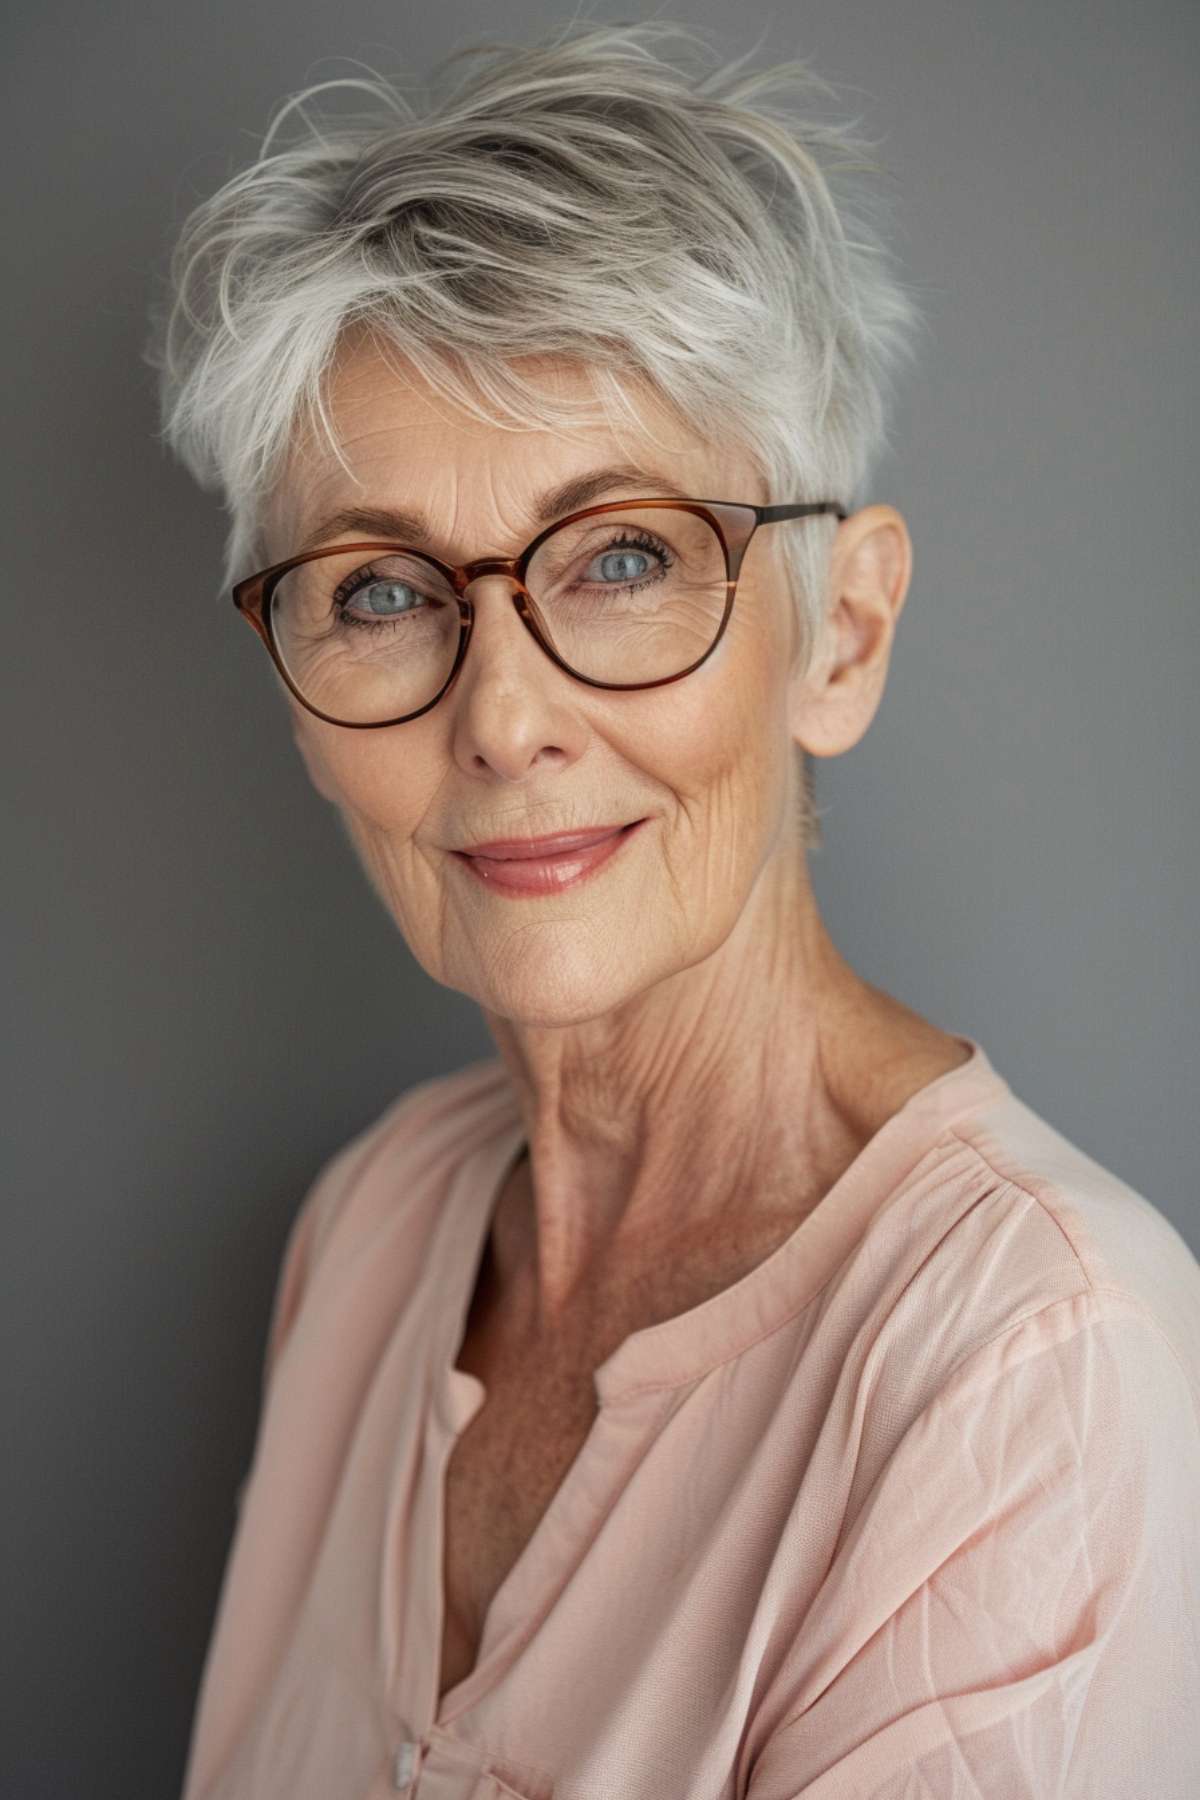 Choppy pixie cut for older women with glasses, showcasing textured layers and grey tones.